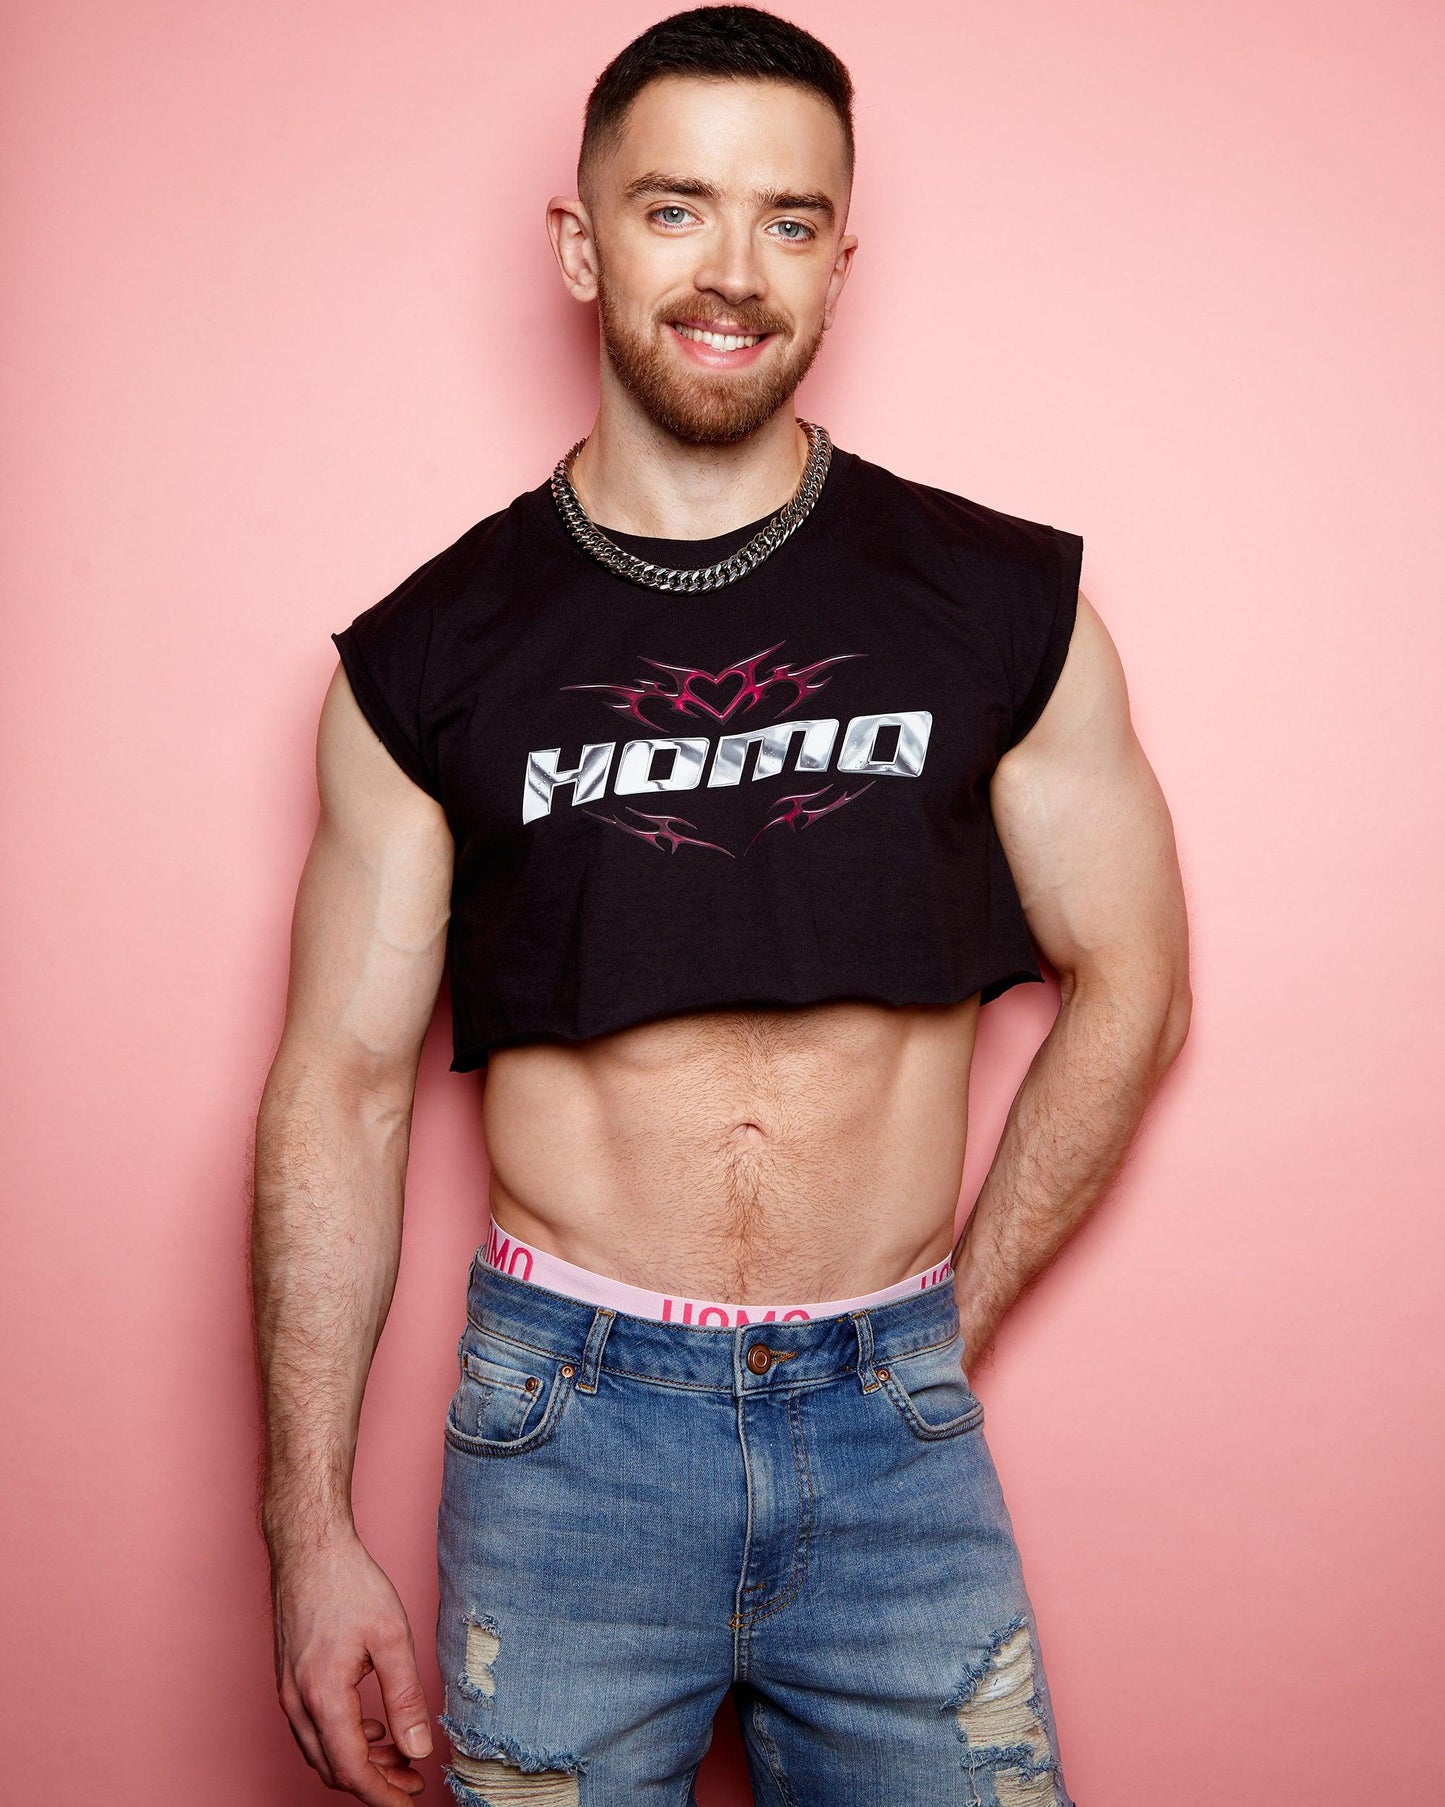 Chrome Y2K: HOMO, silver and pink on black - mens sleeveless crop top. - HOMOLONDON